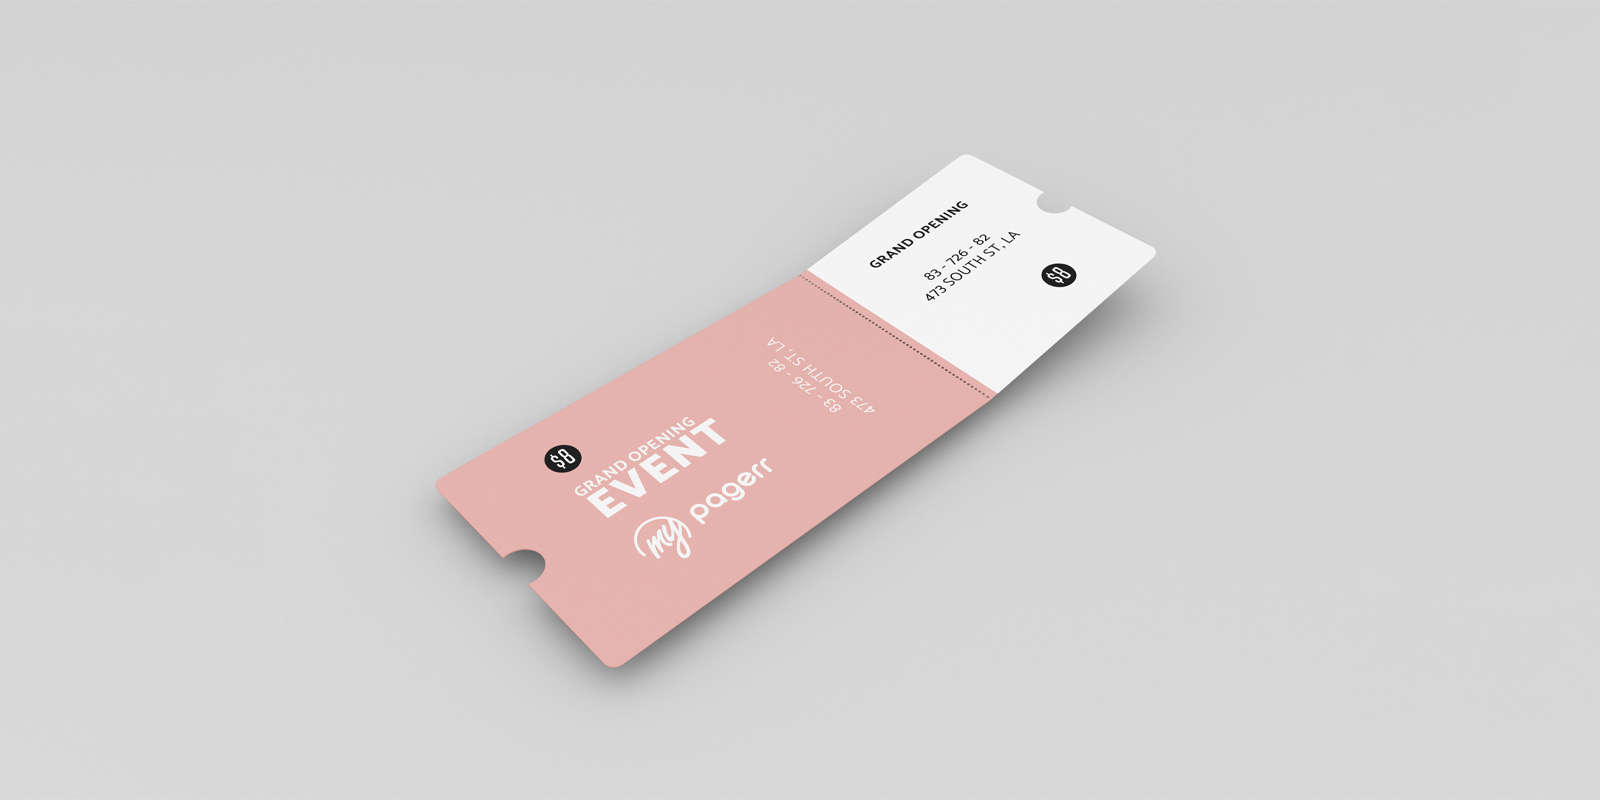 Tickets in Warsaw - Print with Pagerr